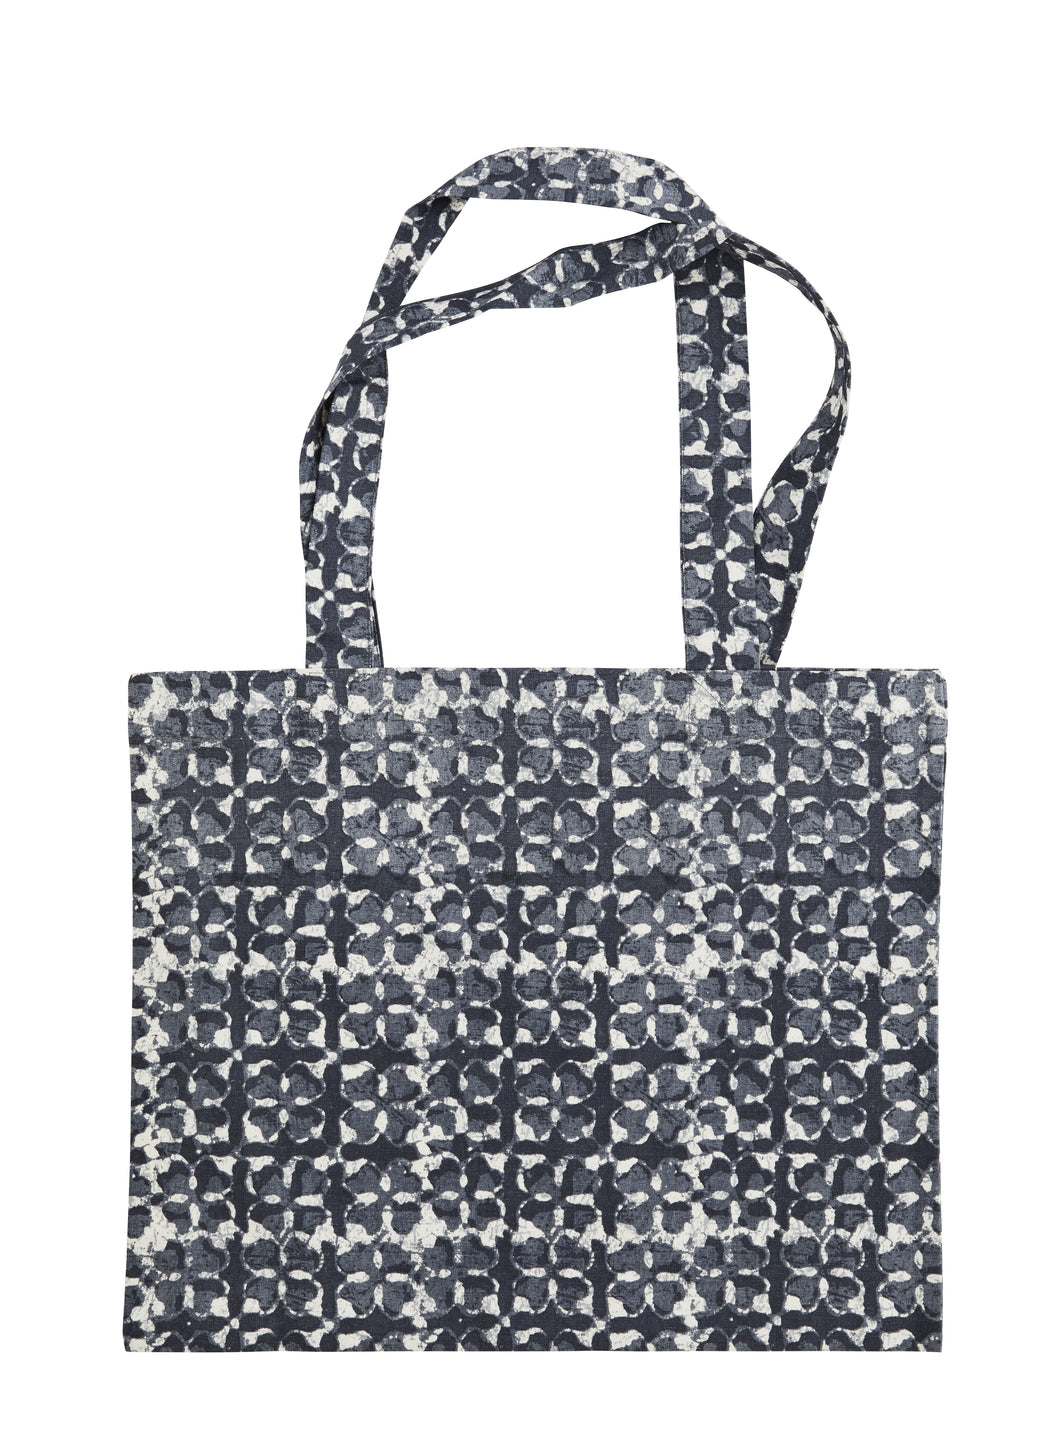 * SPECIAL 20% OFF Blue Printed Tote Bag